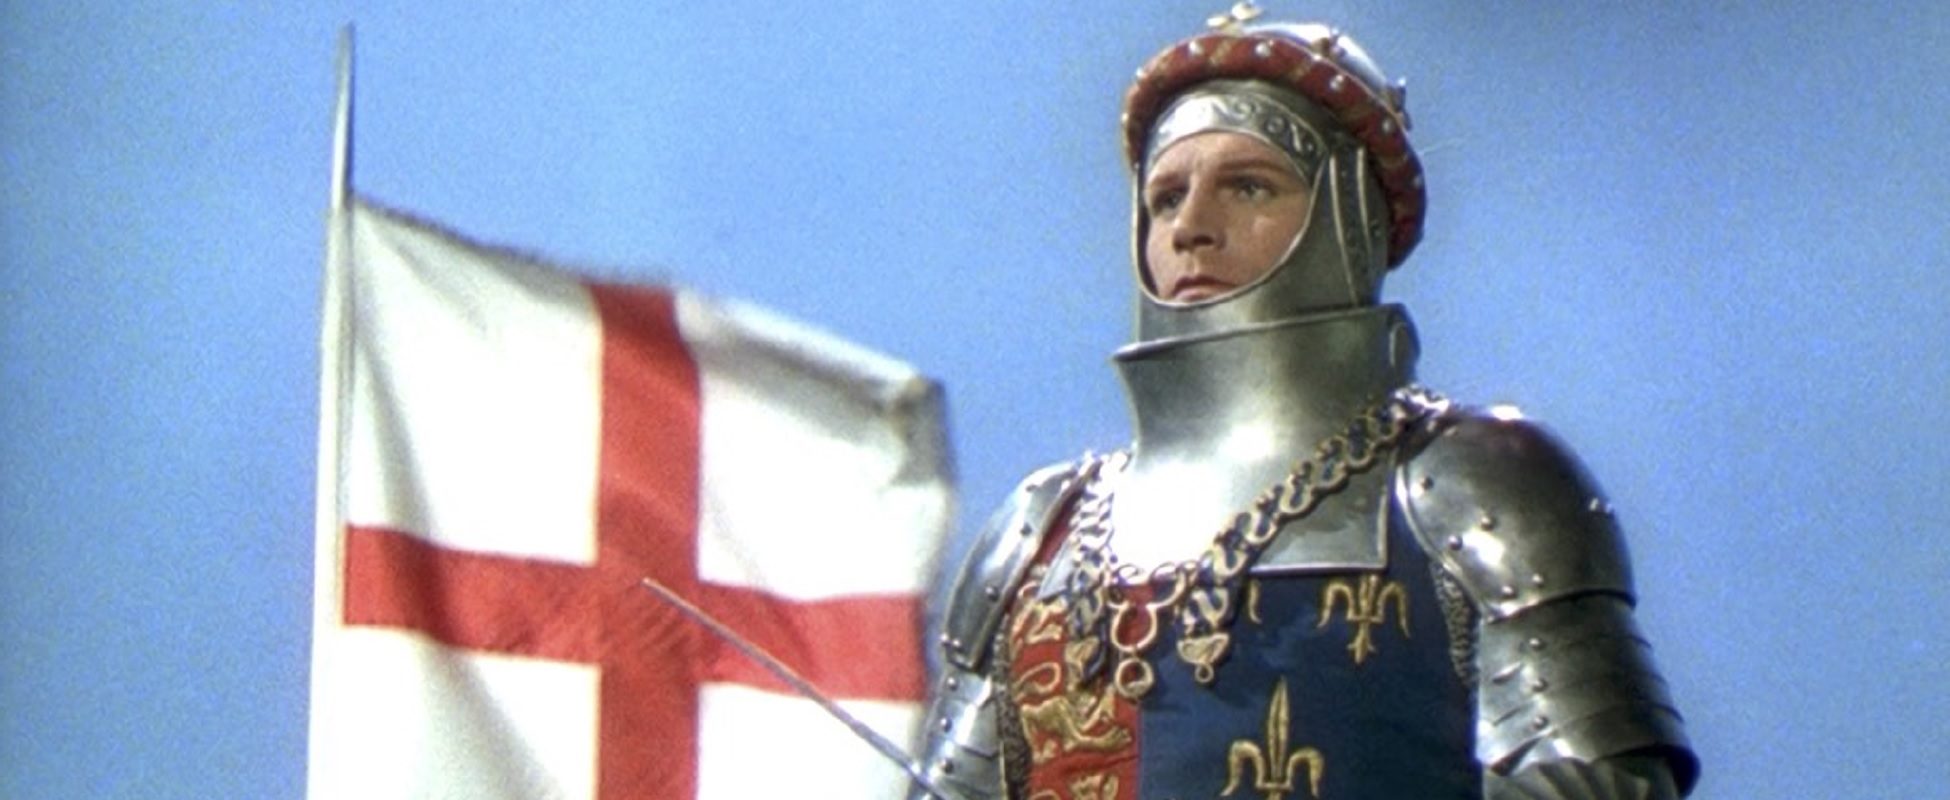 In 1413, the English King, Henry v Battle